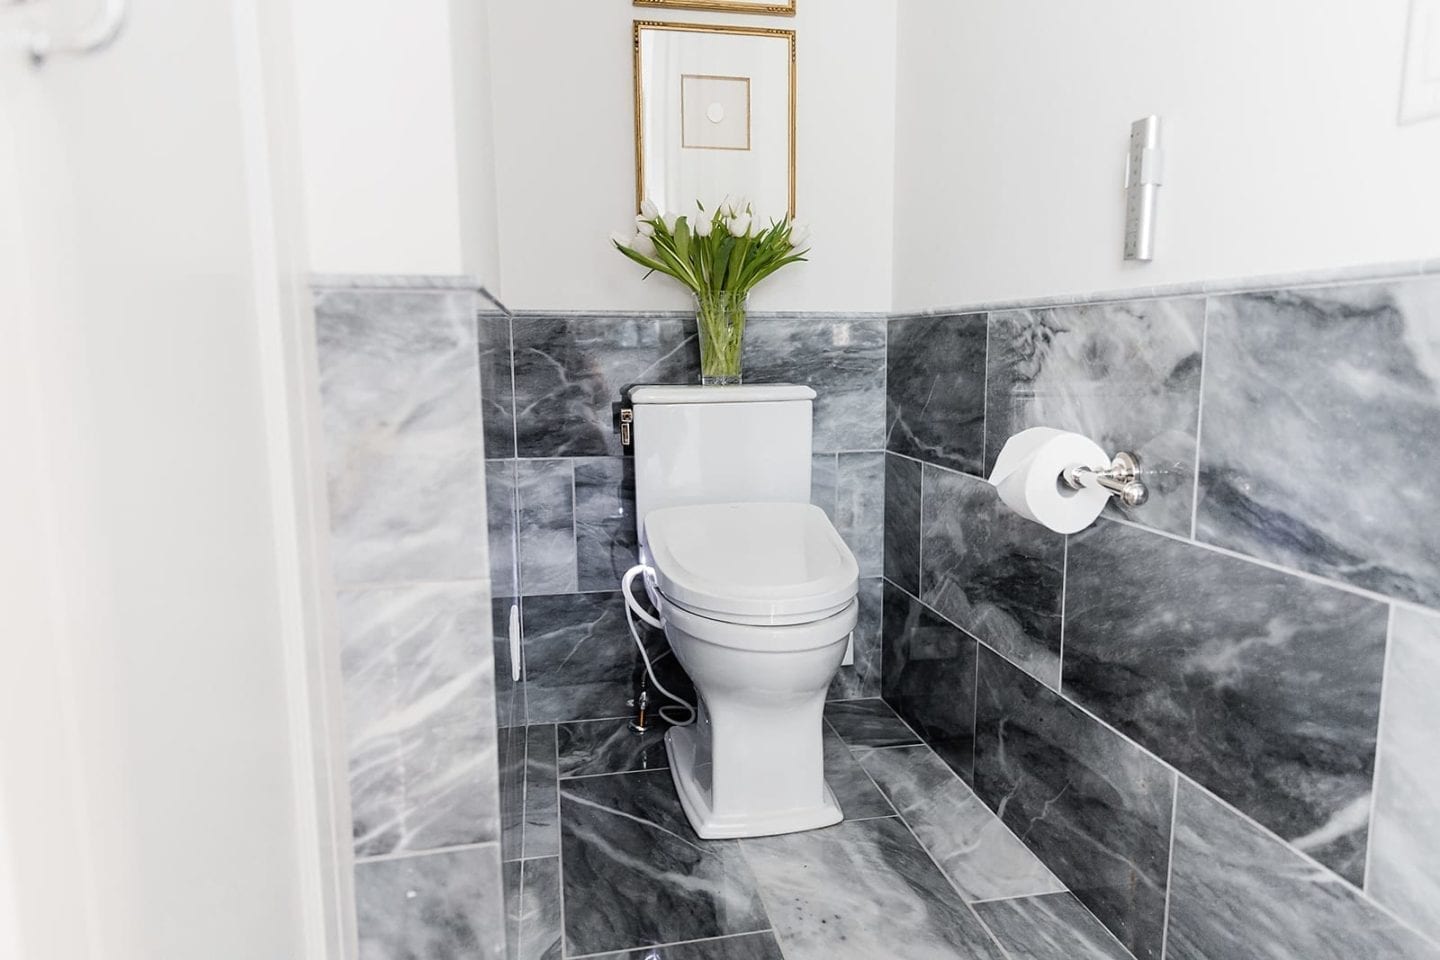 Bidet Toilets in formal master bathroom full of gray marble. White tulips and Intaglio frames.